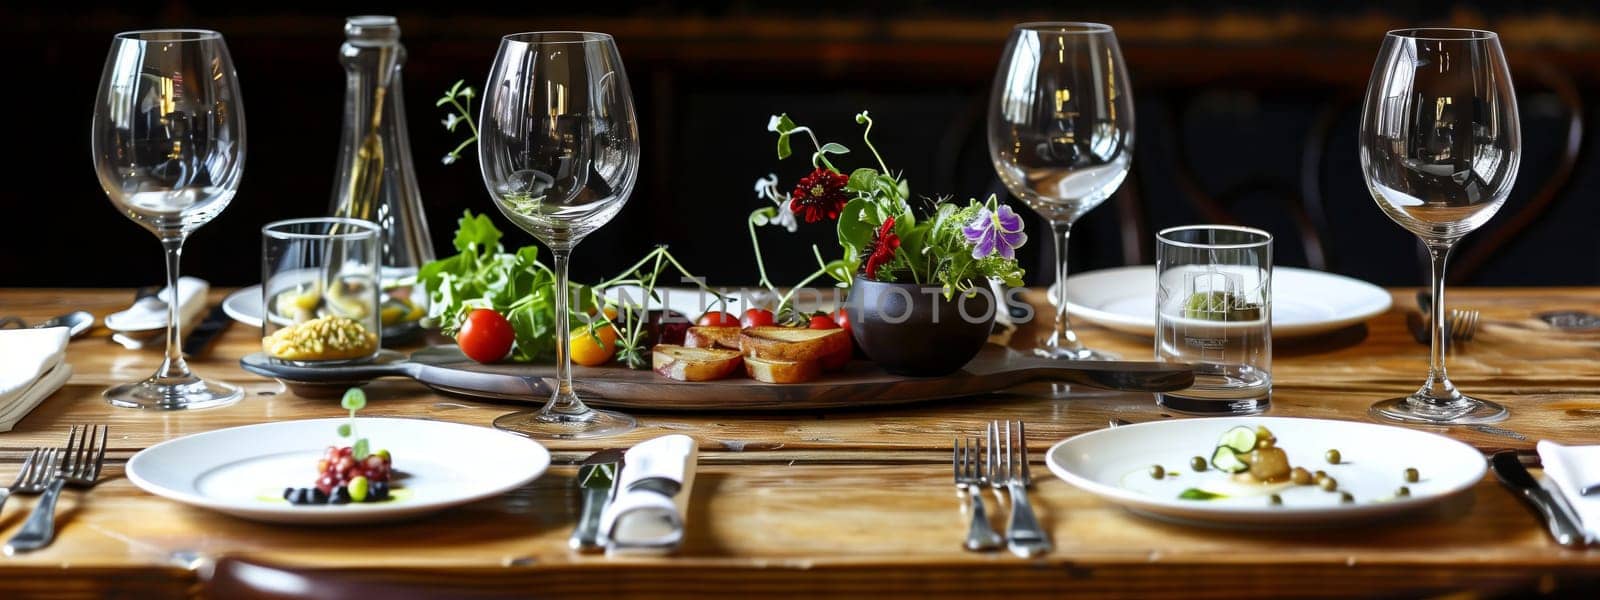 A wooden table adorned with tableware including plates, wine glasses, and utensils. The setting is perfect for a special event or intimate dining experience